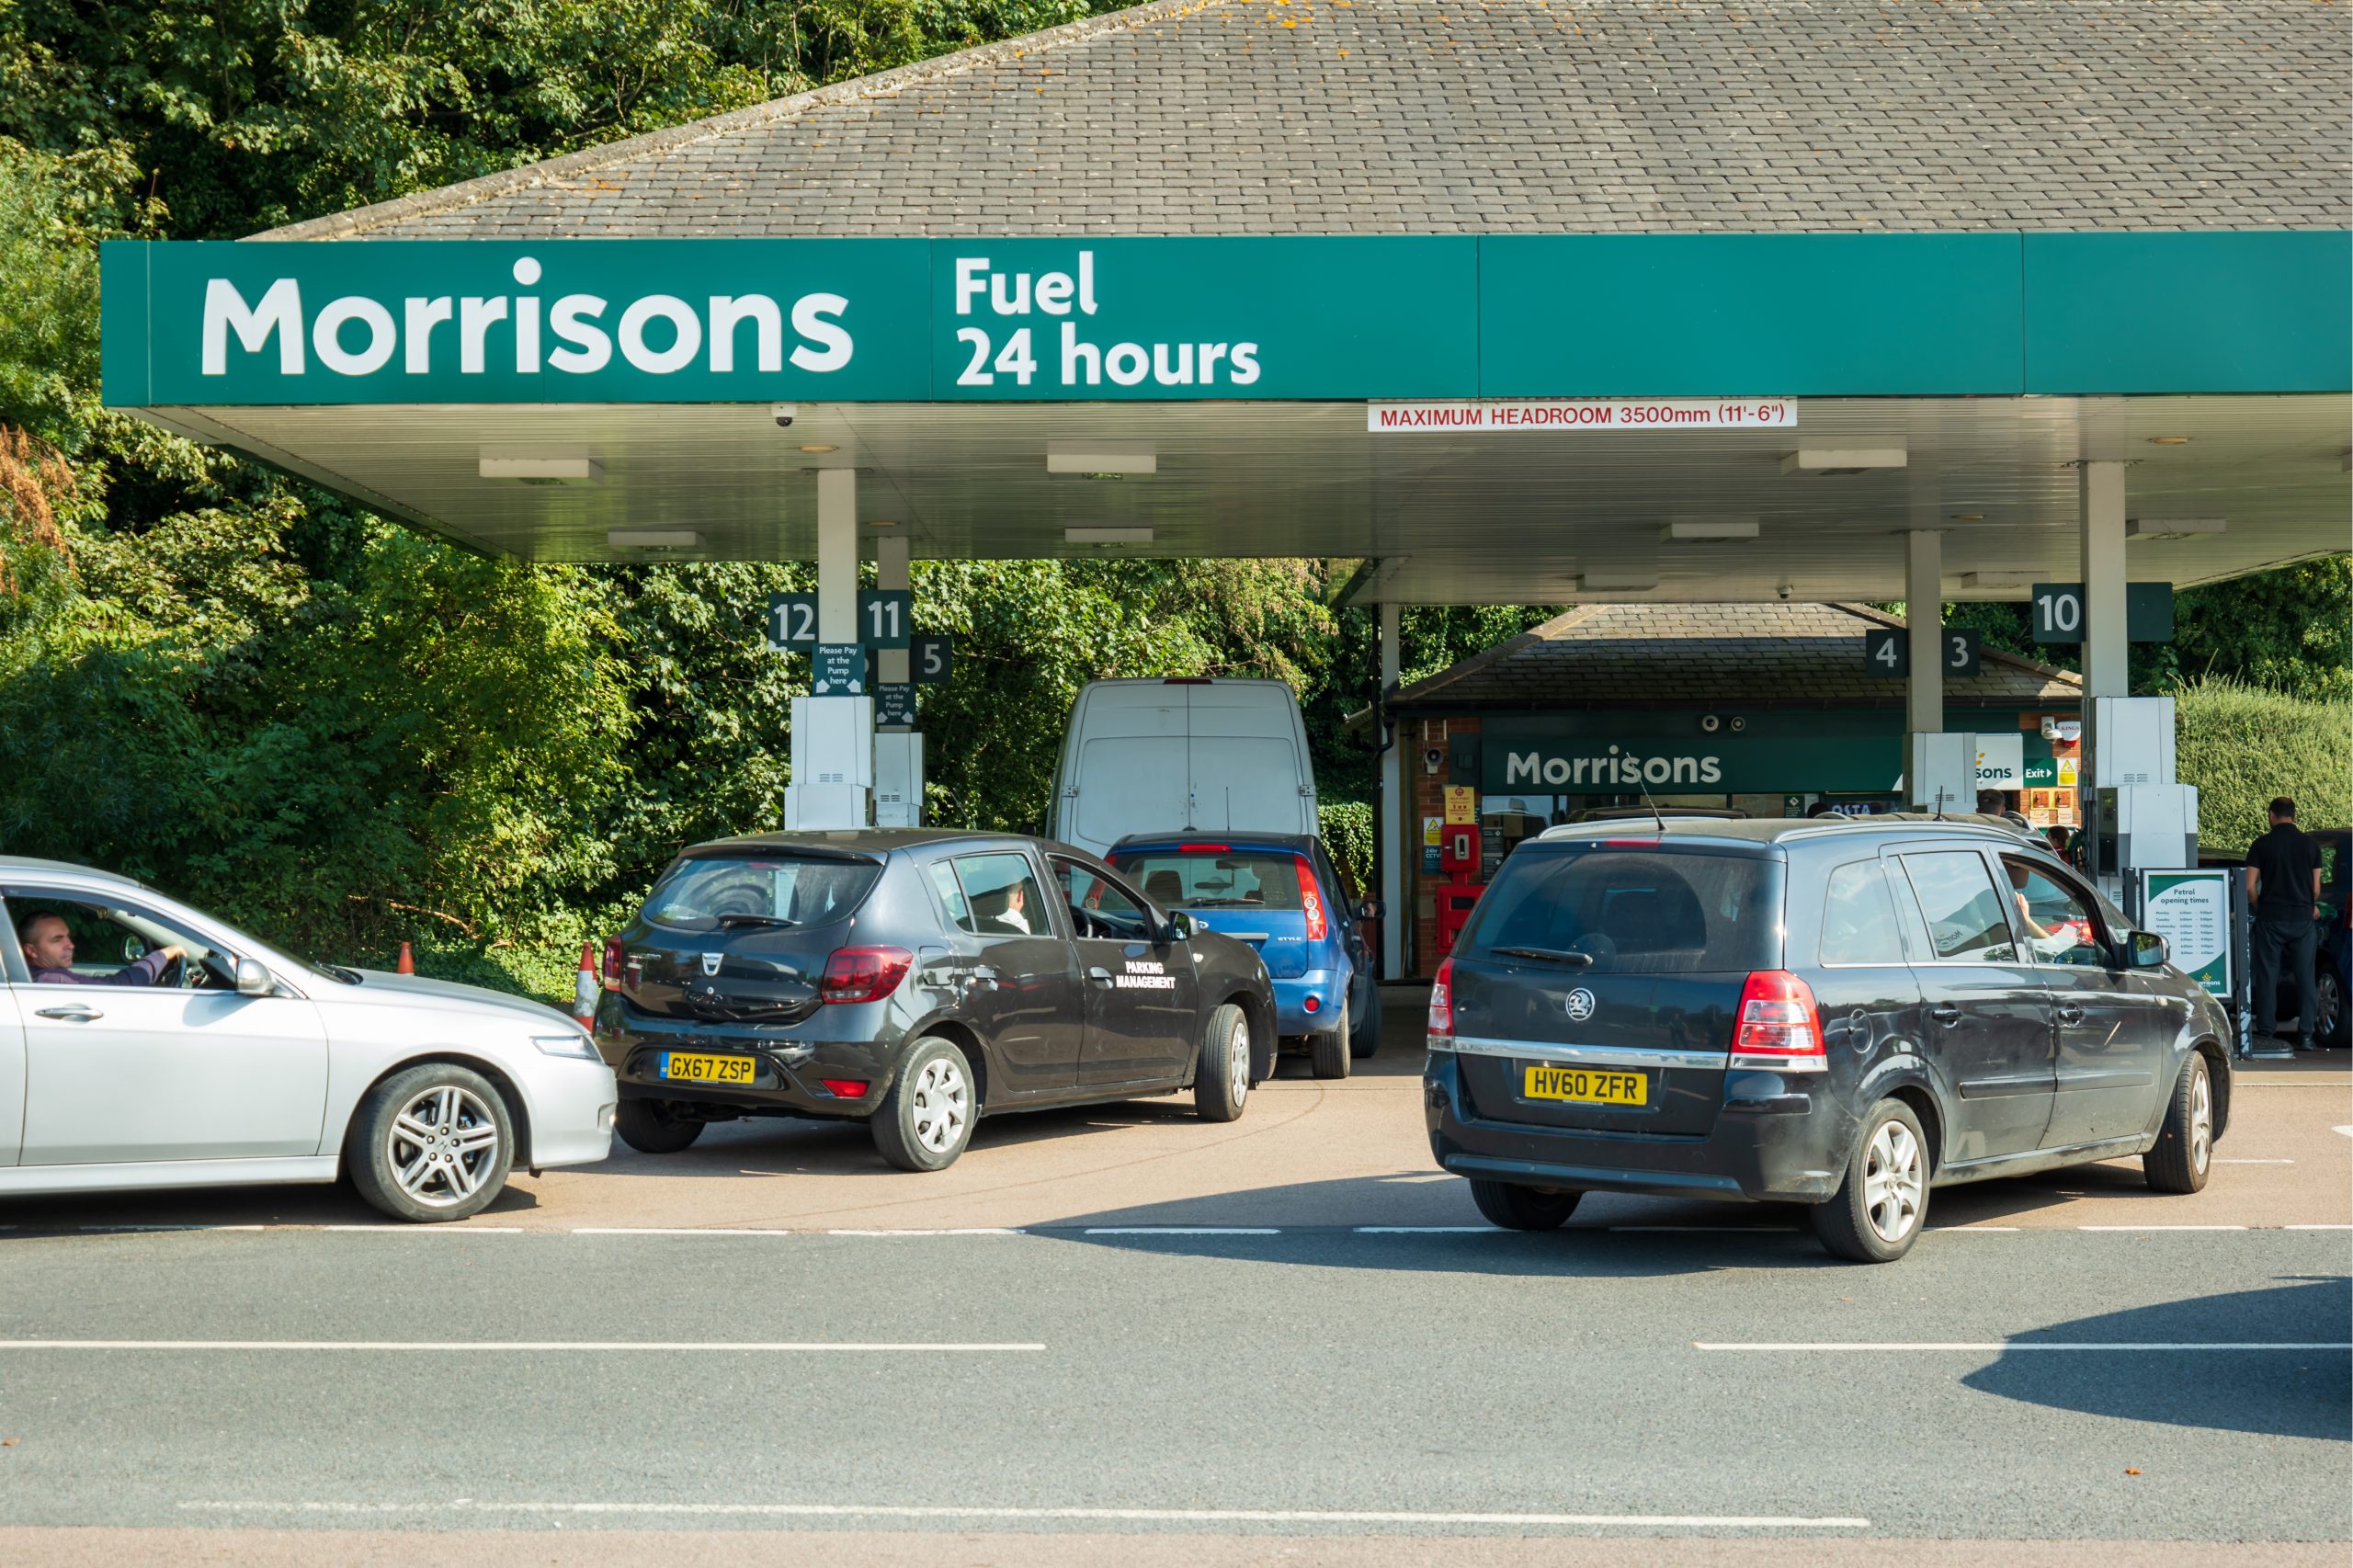 Morrisons' takeover by a private equity firm could lead to higher petrol prices in more than 100 locations